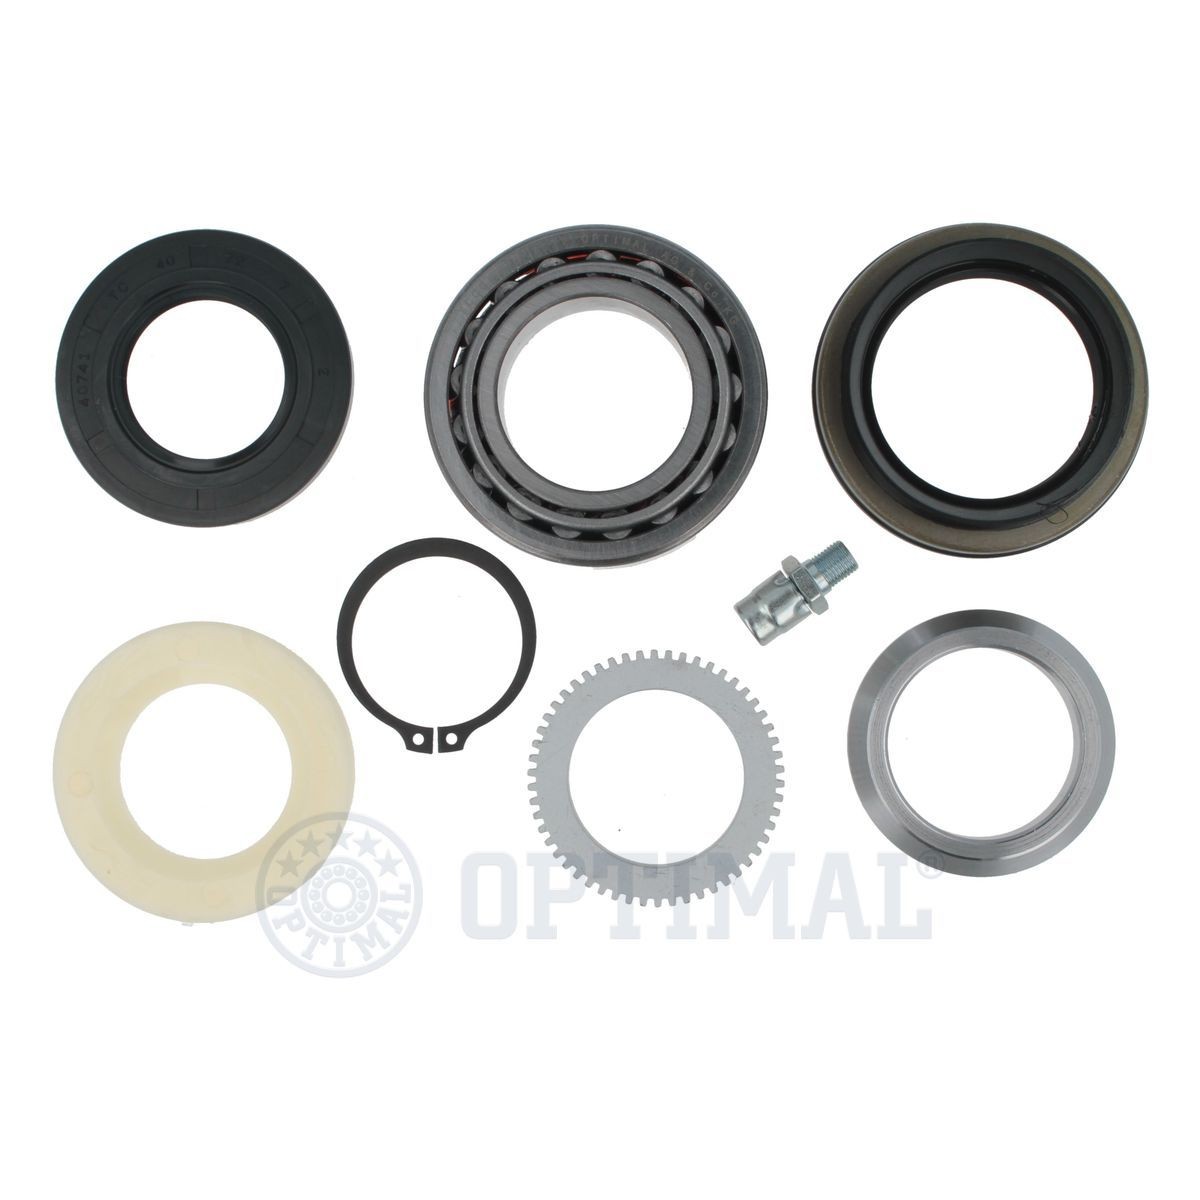 OPTIMAL 962749L Wheel bearing kit with attachment material, with fastening material